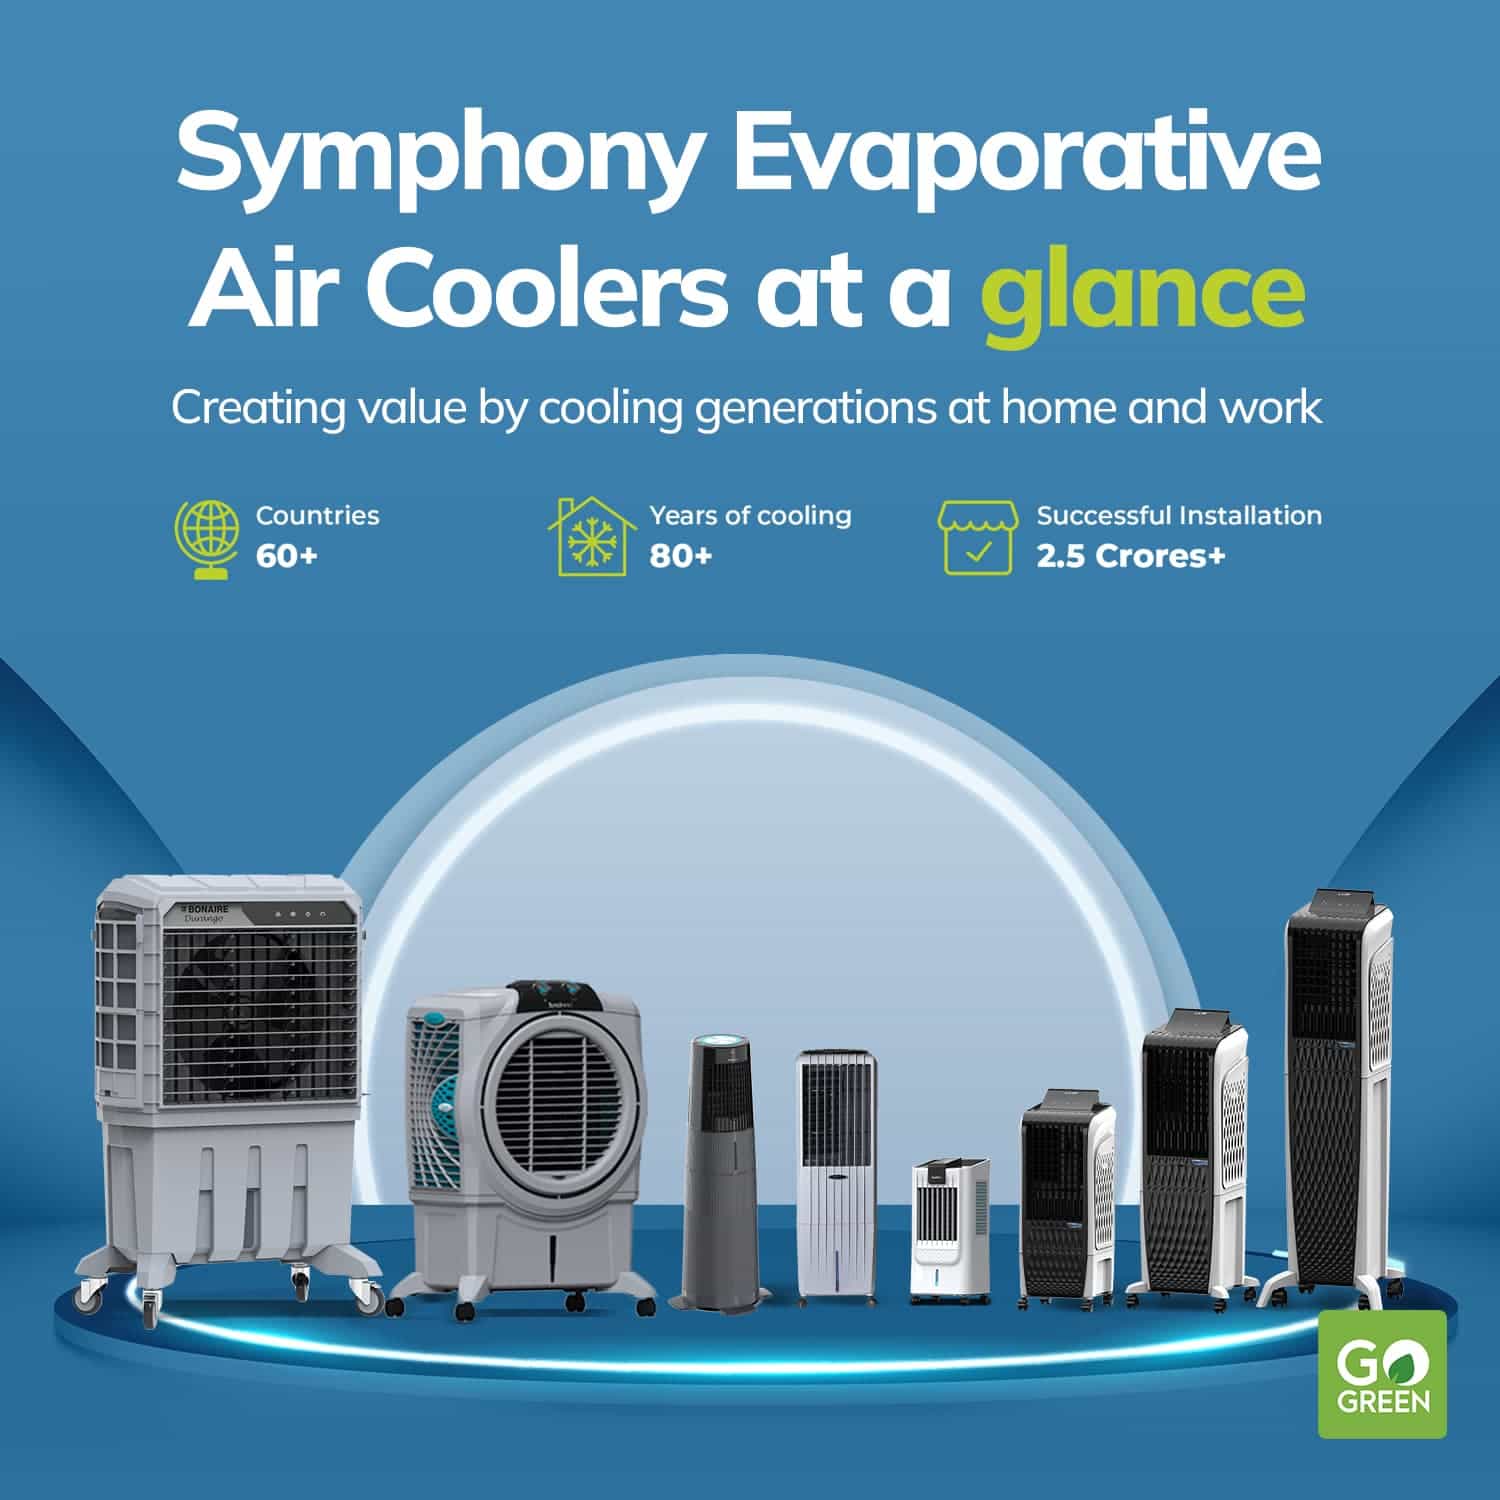 Symphony Evaporative Air Coolers at a glance Creating value by cooling generations at home and work.